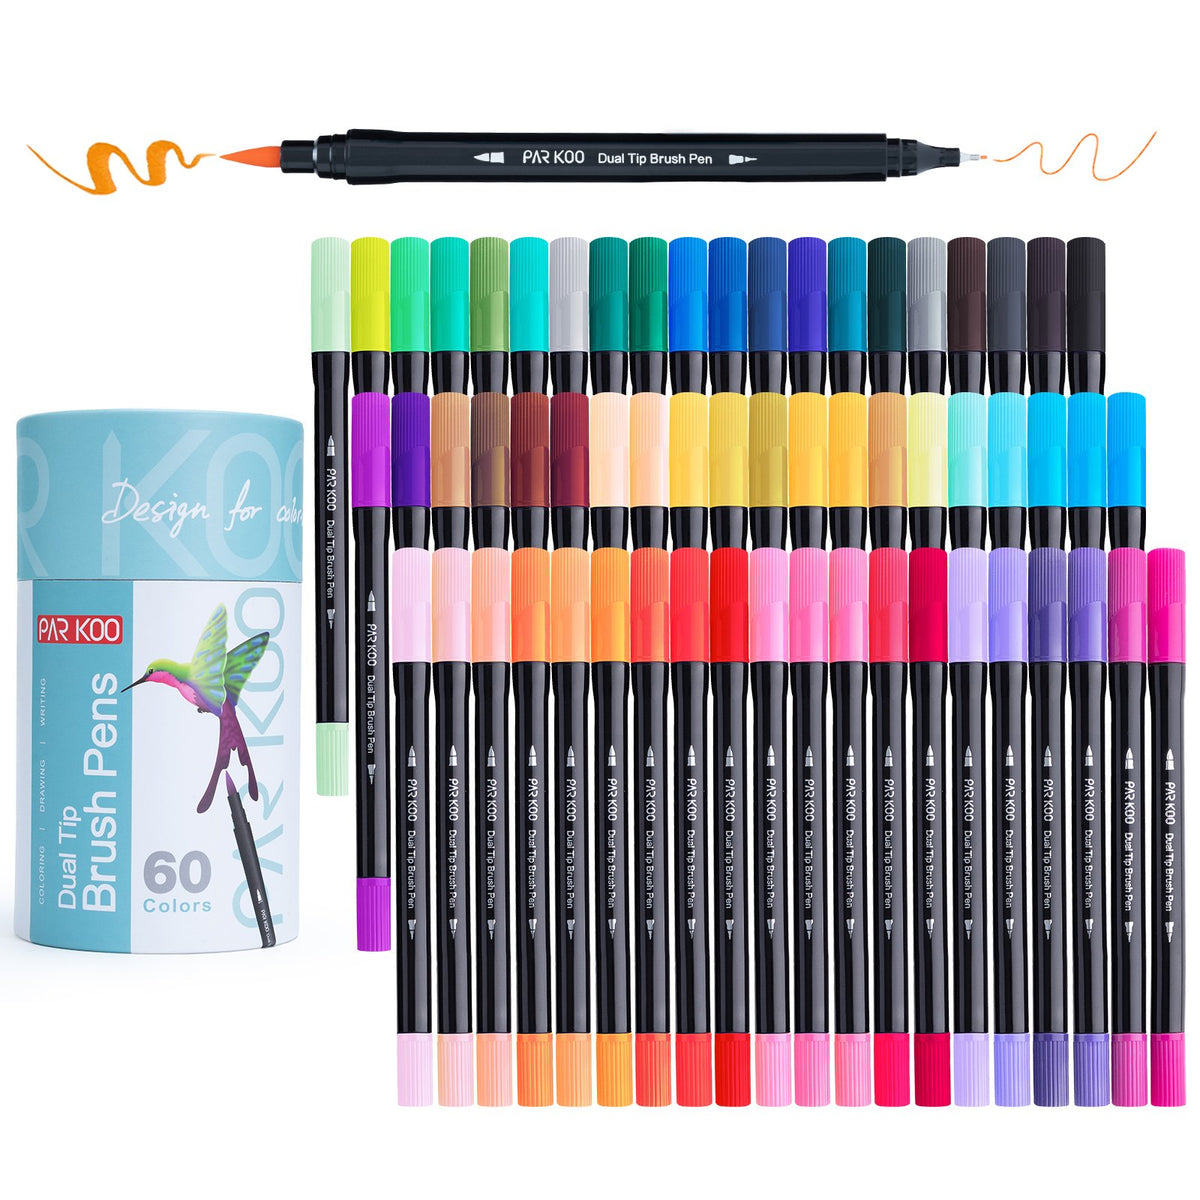 https://www.parkooshop.com/cdn/shop/products/parkoo-pens-refills-dual-tip-brush-pens-for-coloring-books-parkoo-60-colors-artist-fine-and-brush-tip-colored-markers-for-bullet-journaling-kid-adult-drawing-note-taking-lettering-pla_2bdf9826-8554-4724-884c-17b4ecea772d_1200x1200.jpg?v=1629104924